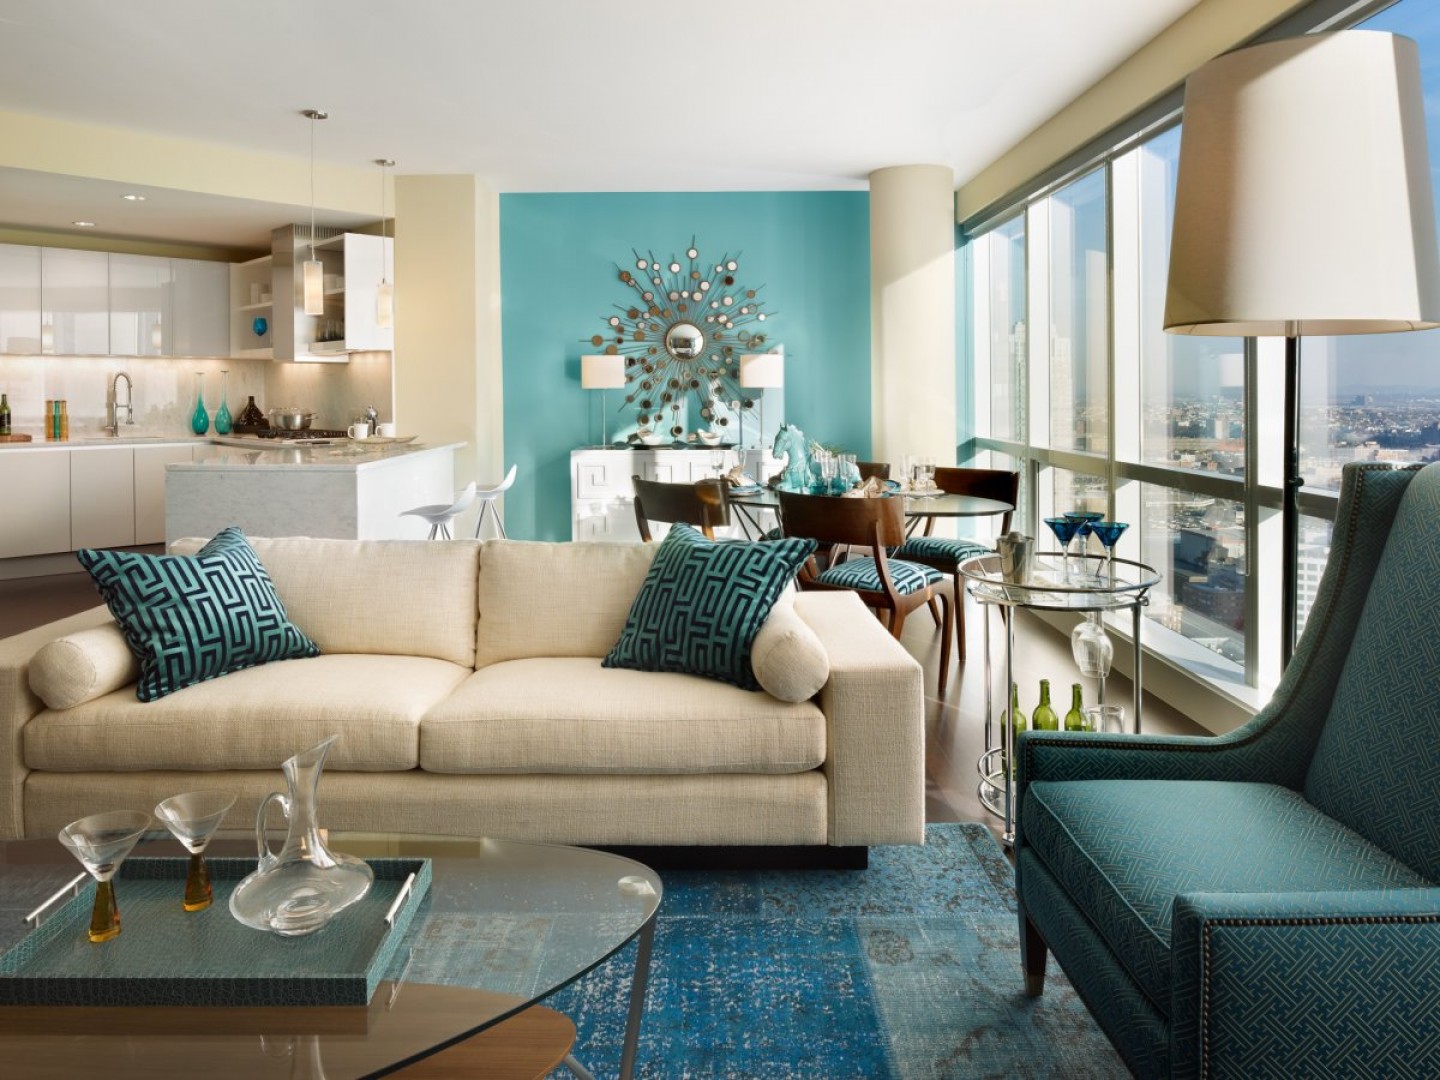 Cozy Brown And Turquoise Living Room Decor